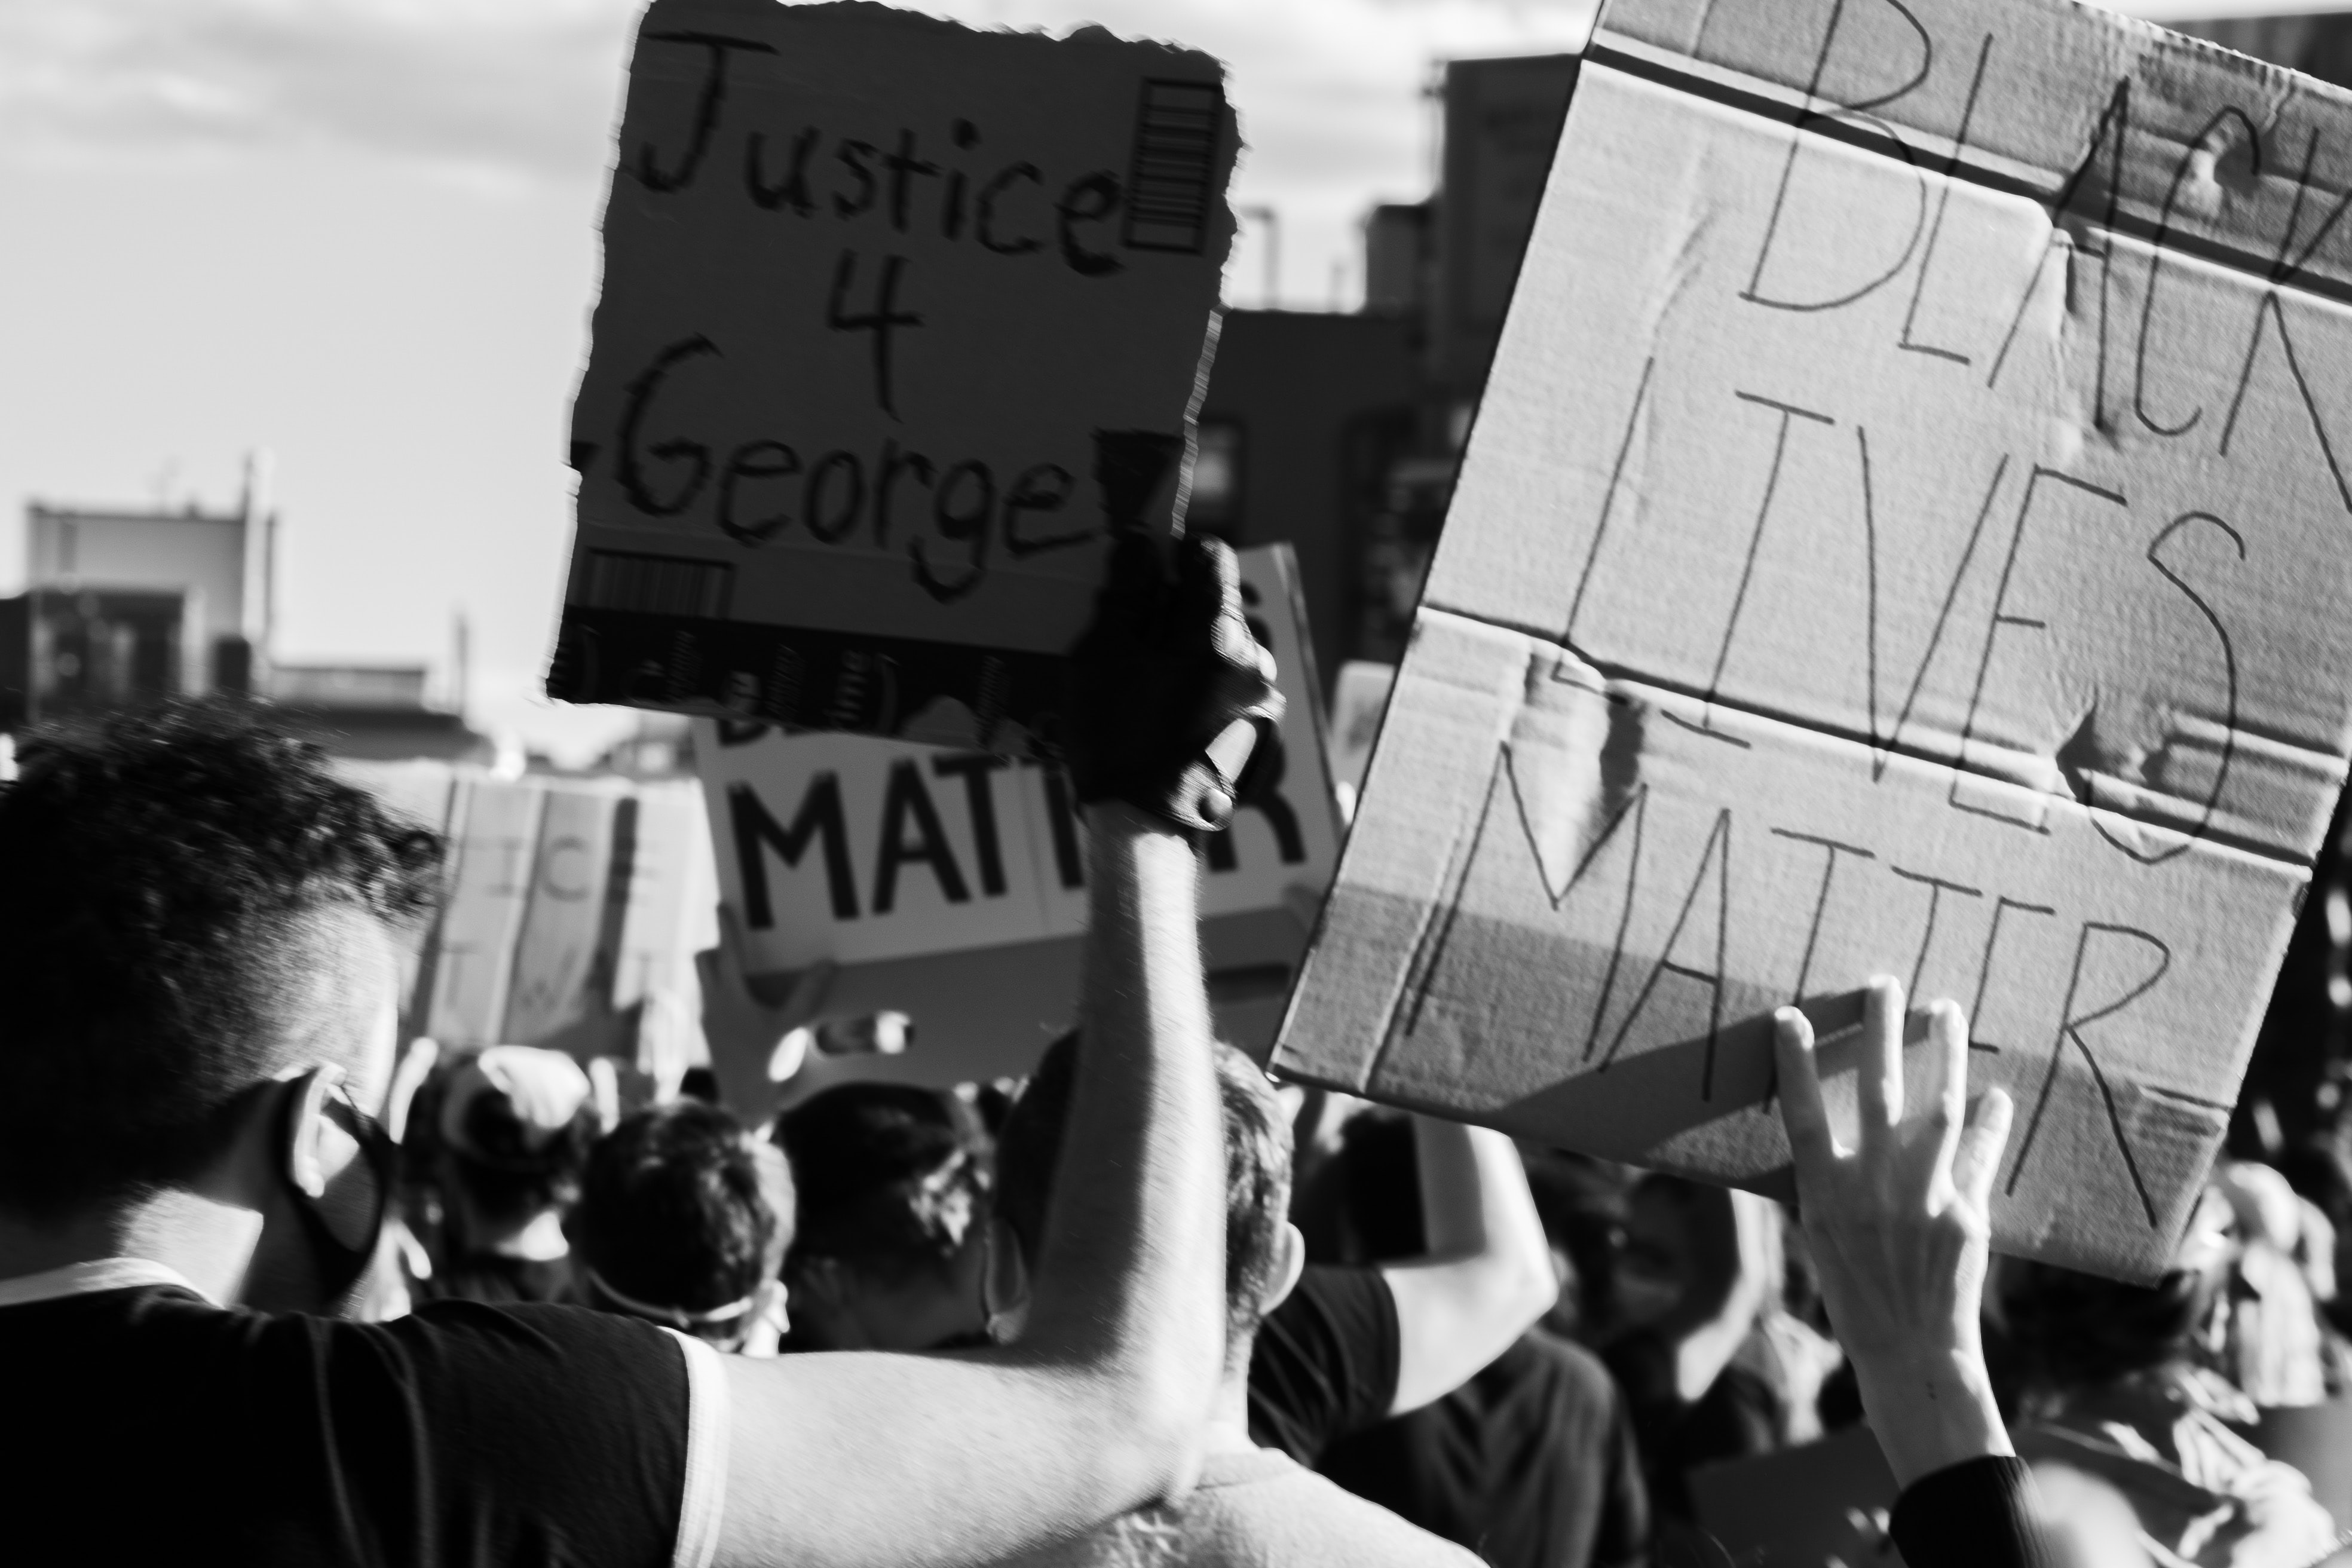 A black and white photo of a crowd of protestors holding up signs like 'Justice 4 George' and 'Black Lives Matter'.